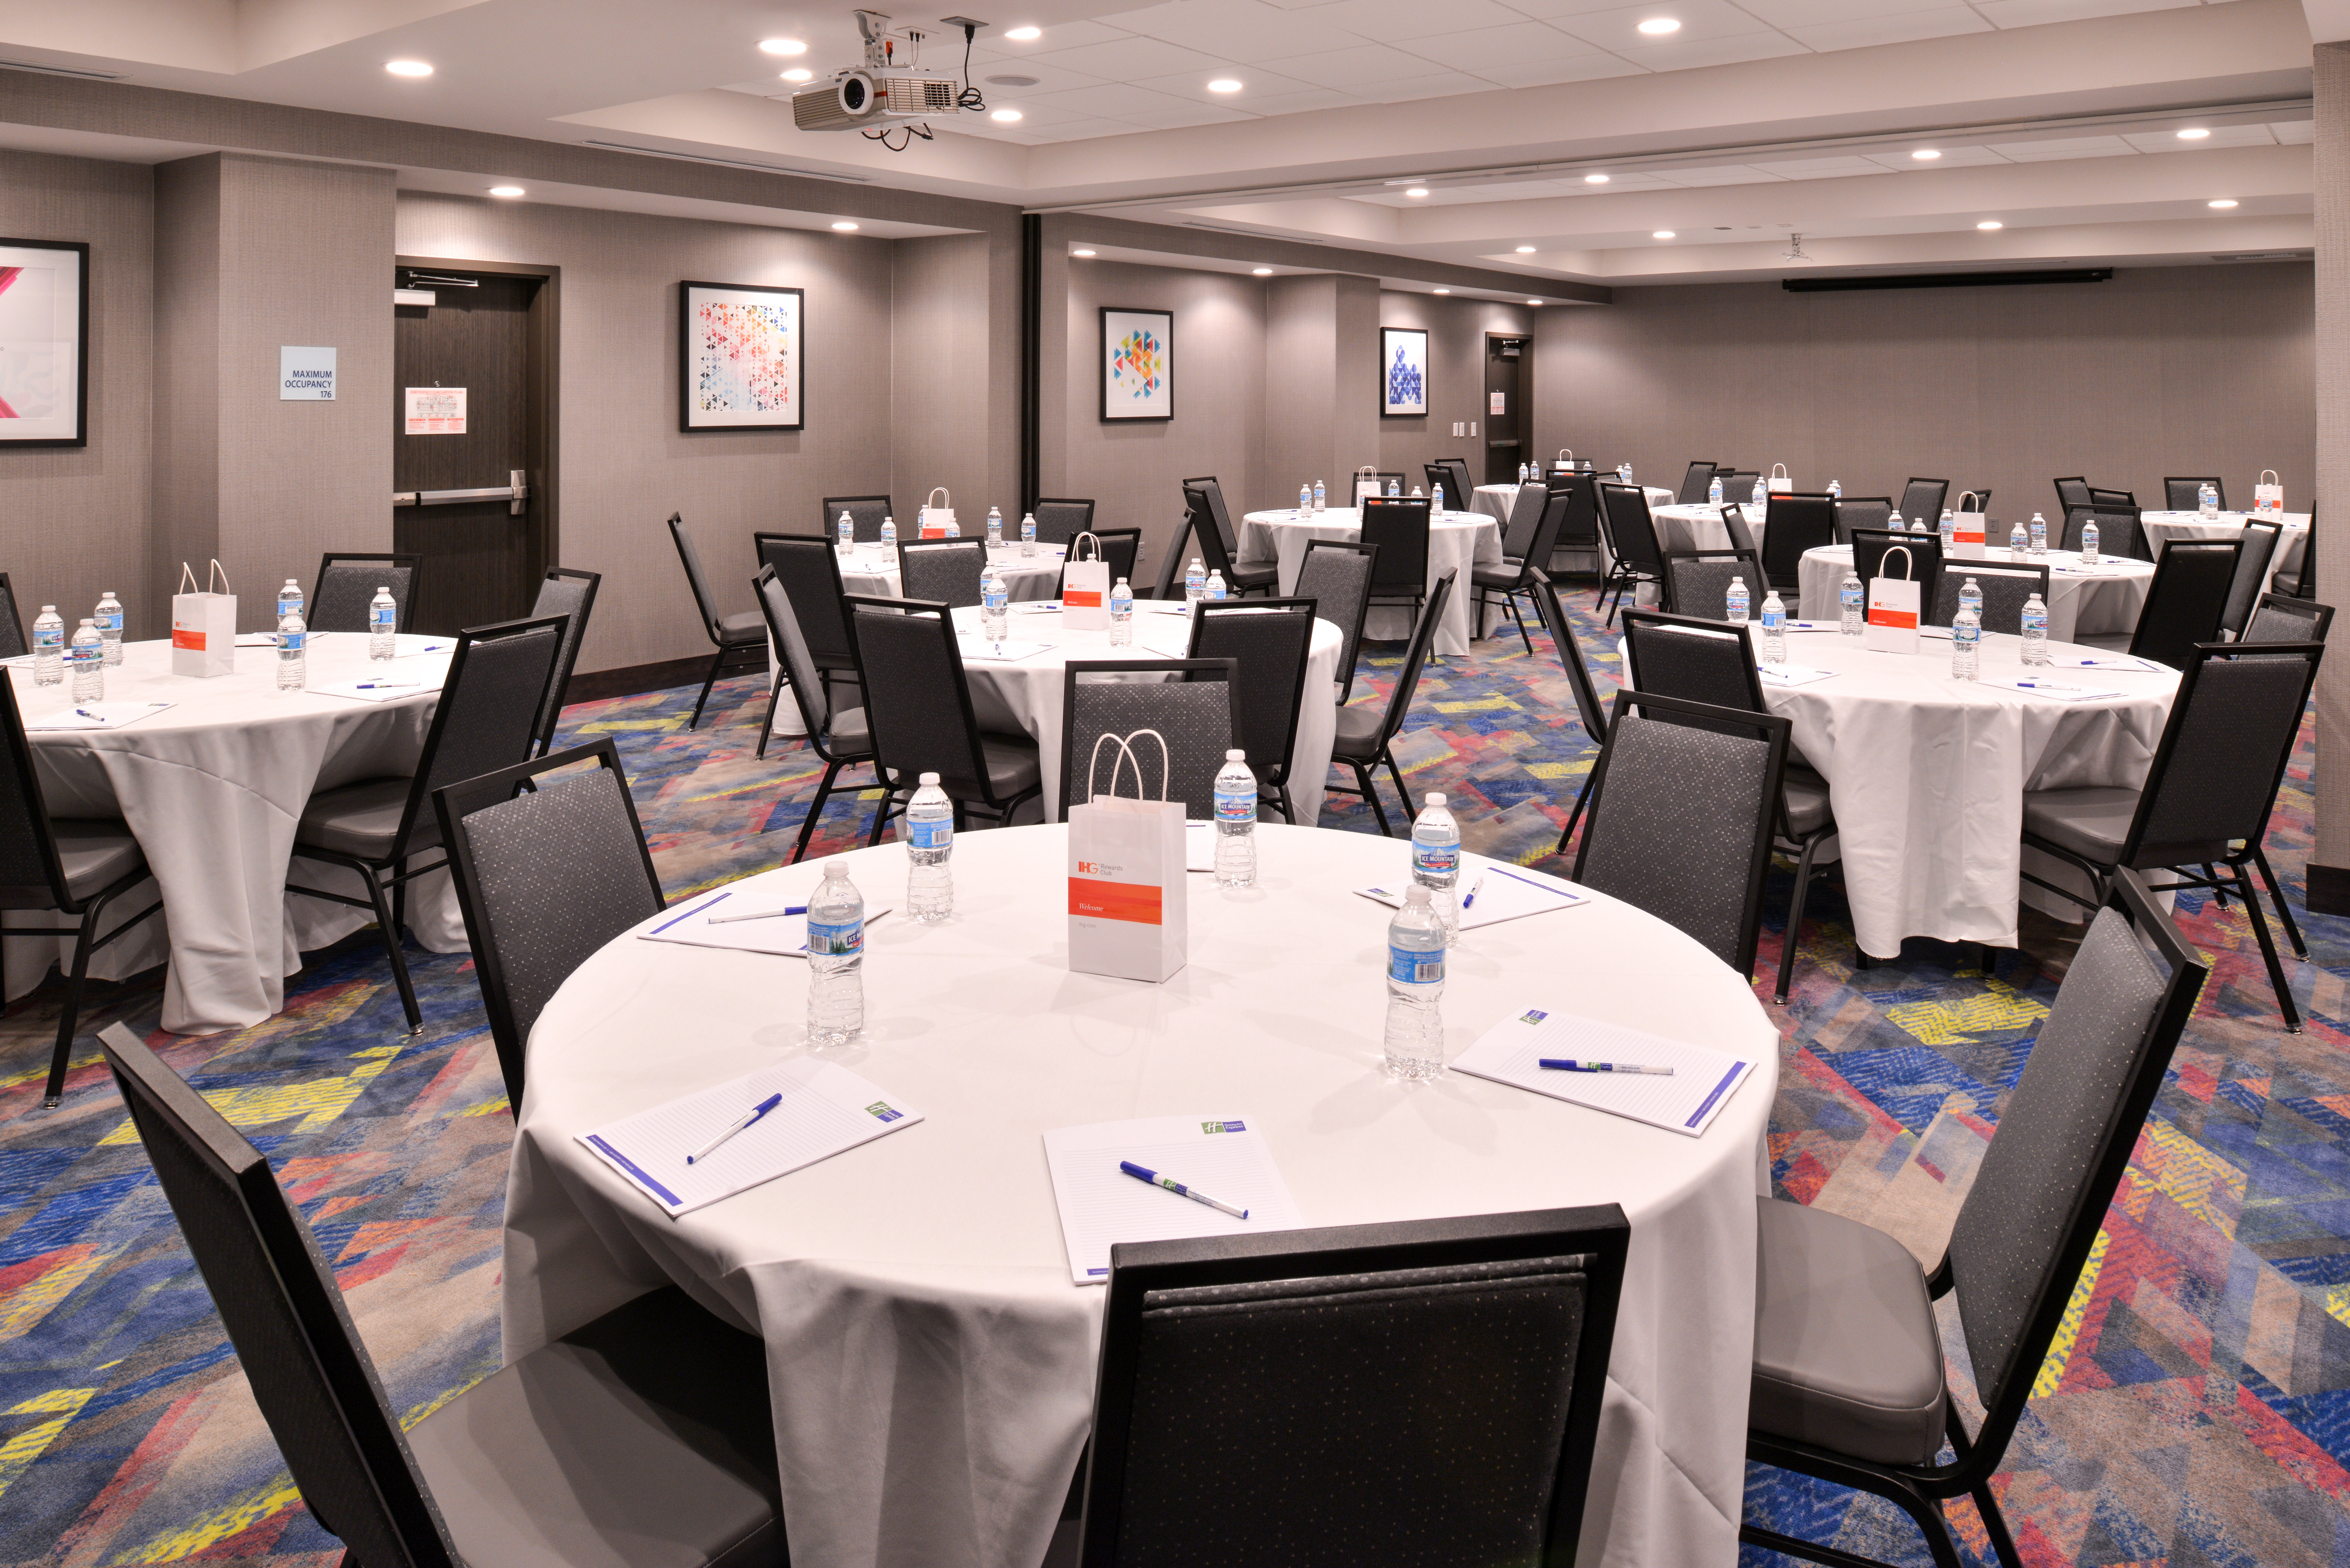 Our Ballroom is ready for your event